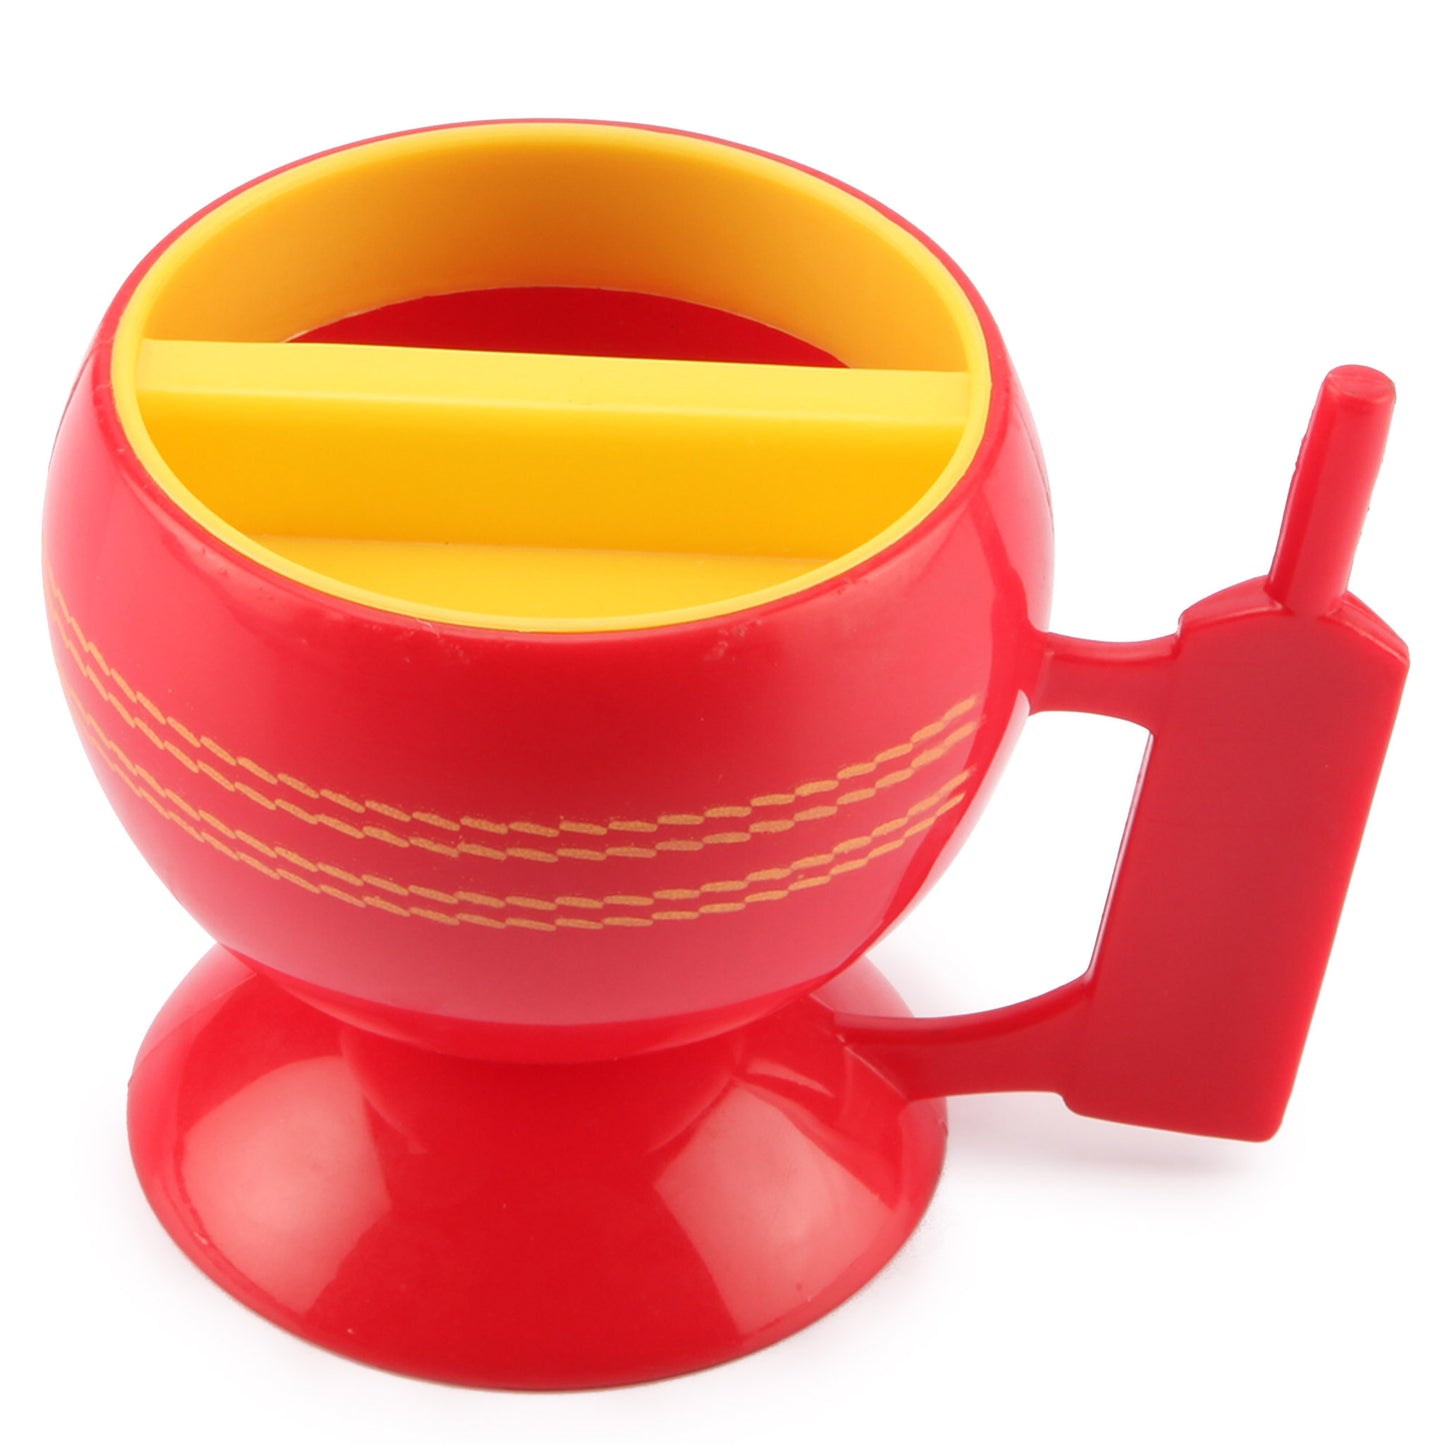 Cricket Cup - Stationery Kit